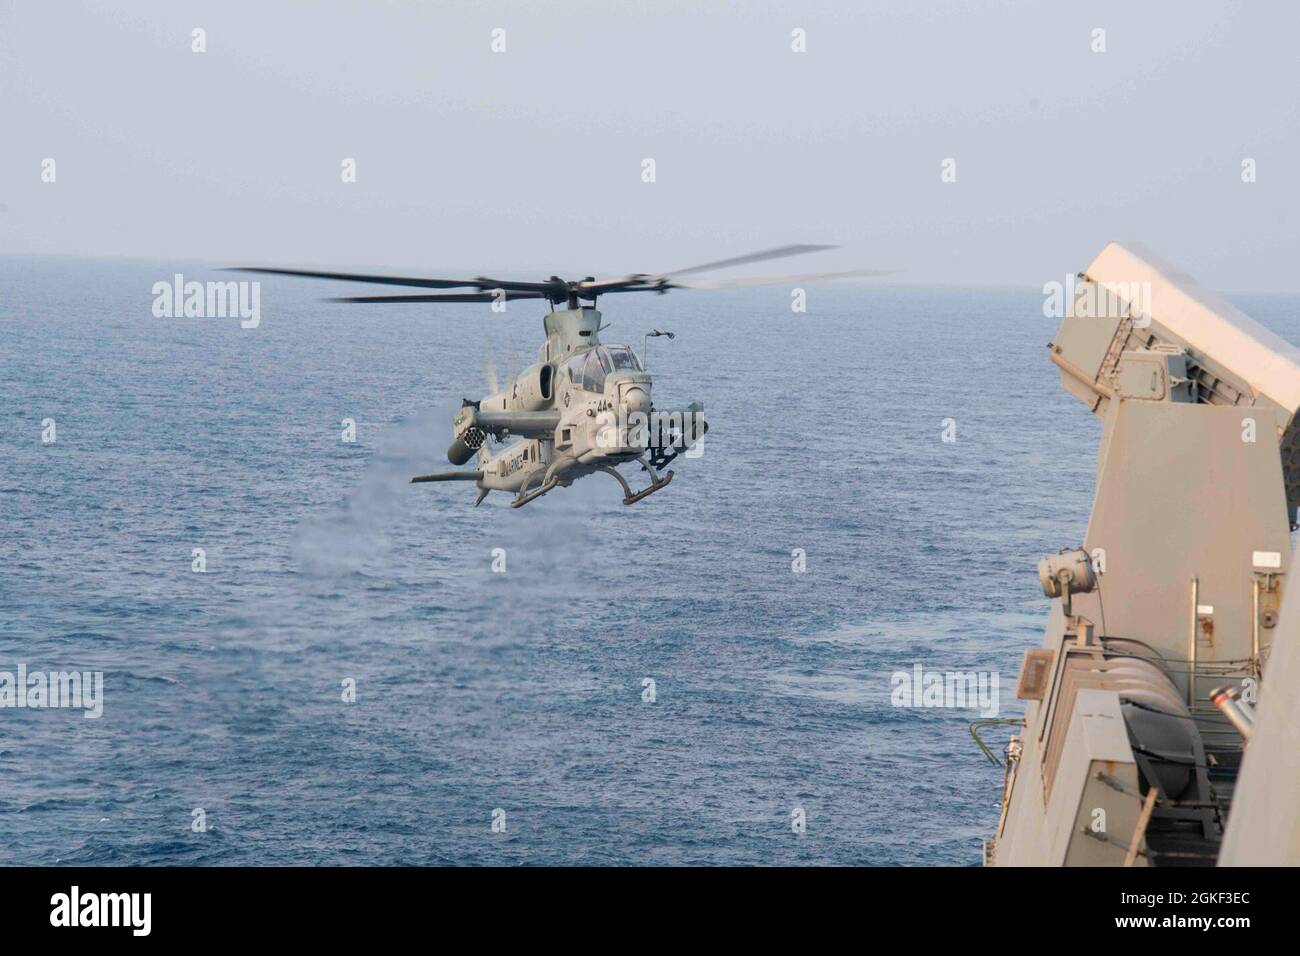 210405-N-JC800-1361   INDIAN OCEAN (April 5, 2021) - A U.S. Marine AH-1Z Super Cobra, assigned to Marine Medium Tiltrotor Squadron 164 (Reinforced), 15th Marine Expeditionary Unit, approaches the flight deck of the amphibious transport dock ship USS Somerset (LPD 25) during La Perouse 2021. Somerset is part of the Makin Island Amphibious Ready Group with embarked 15th Marine Expeditionary Unit operating in the U.S. 7th Fleet area of responsibility. La Perouse is an annual French Navy midshipman deployment called Mission Jeanne d'Arc. The exercise is designed to conduct training, enhance cooper Stock Photo